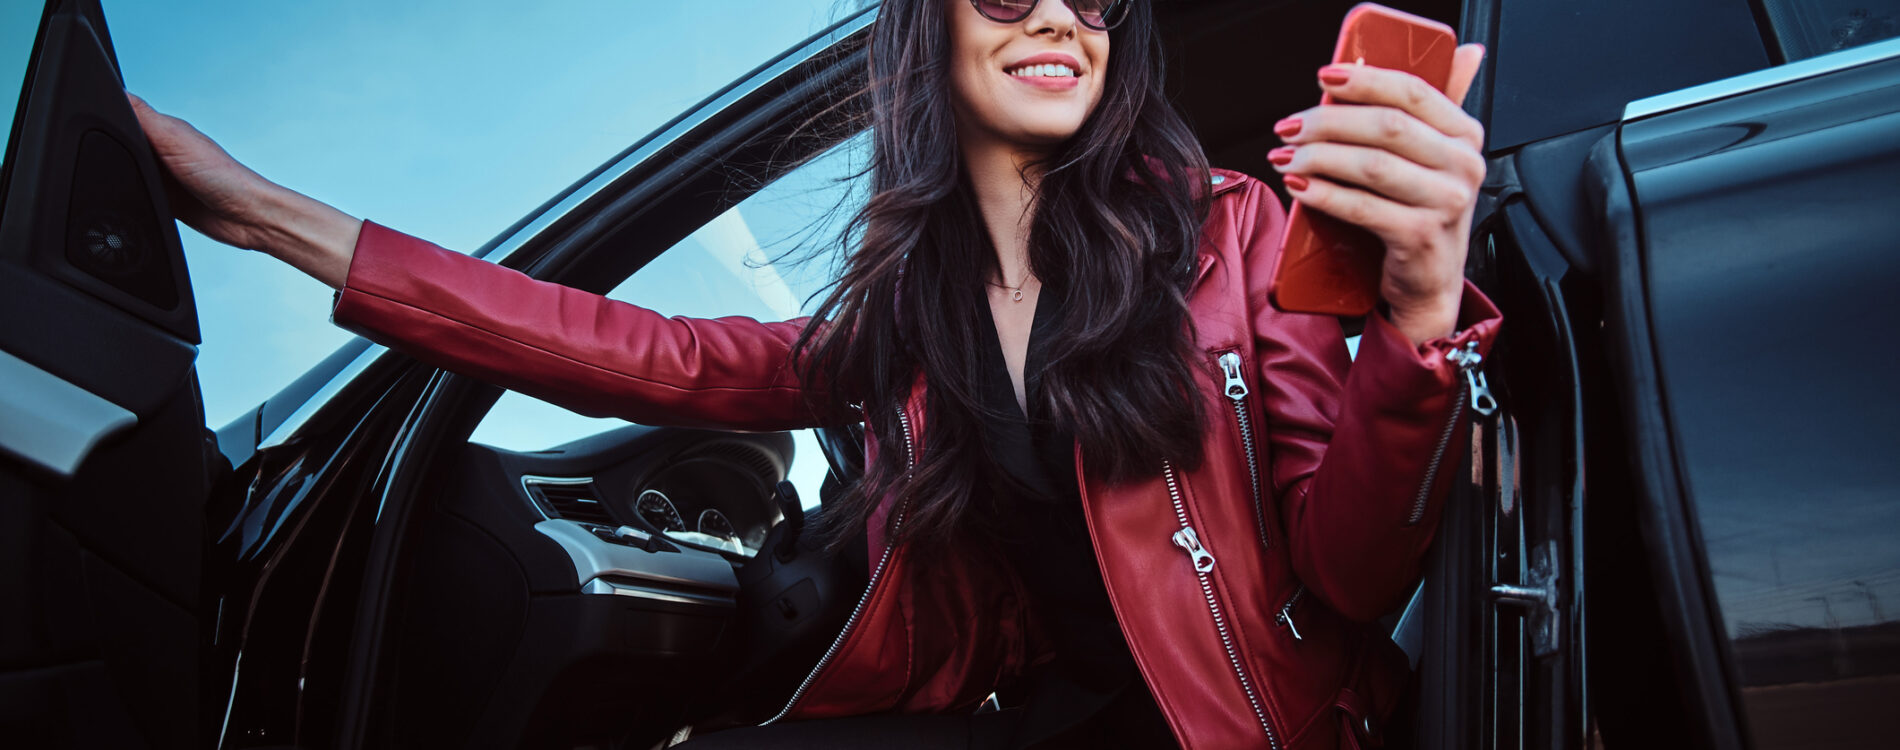 Beautiful smiling women is posing in her new car while chatting on mobile phone. She is wearing red leather jacket and sunglasses.